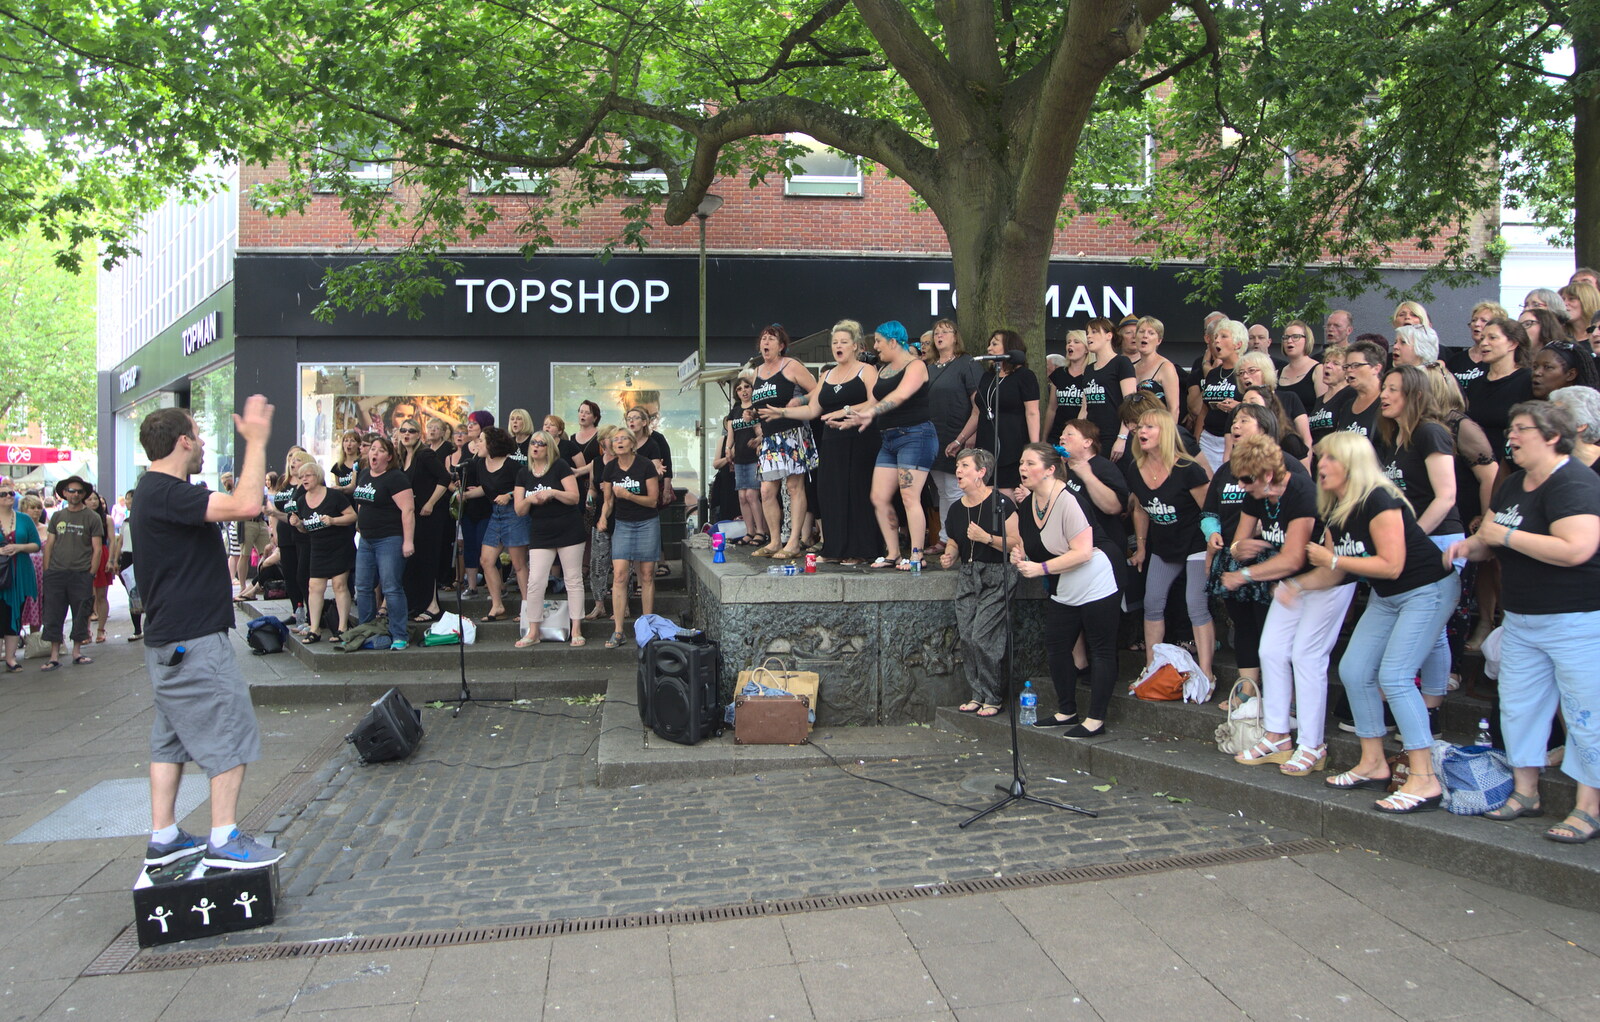 More vigorous singing from Isobel's Choral Flash Mob, Norwich, Norfolk - 17th June 2017